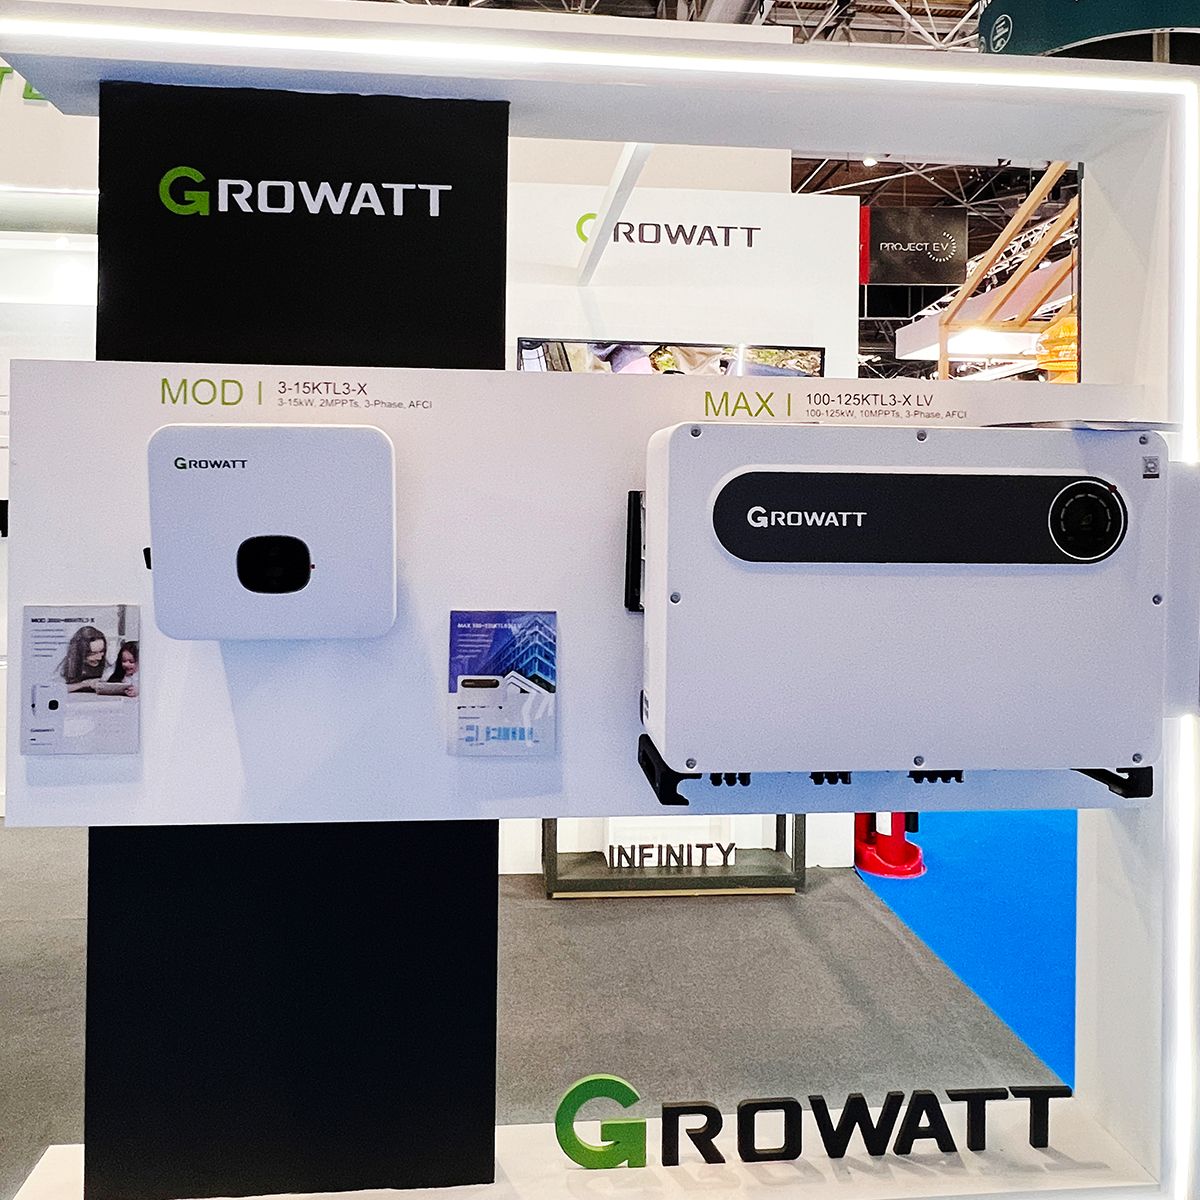 Are Growatt Inverters Any Good? Here's An Installer's Opinion